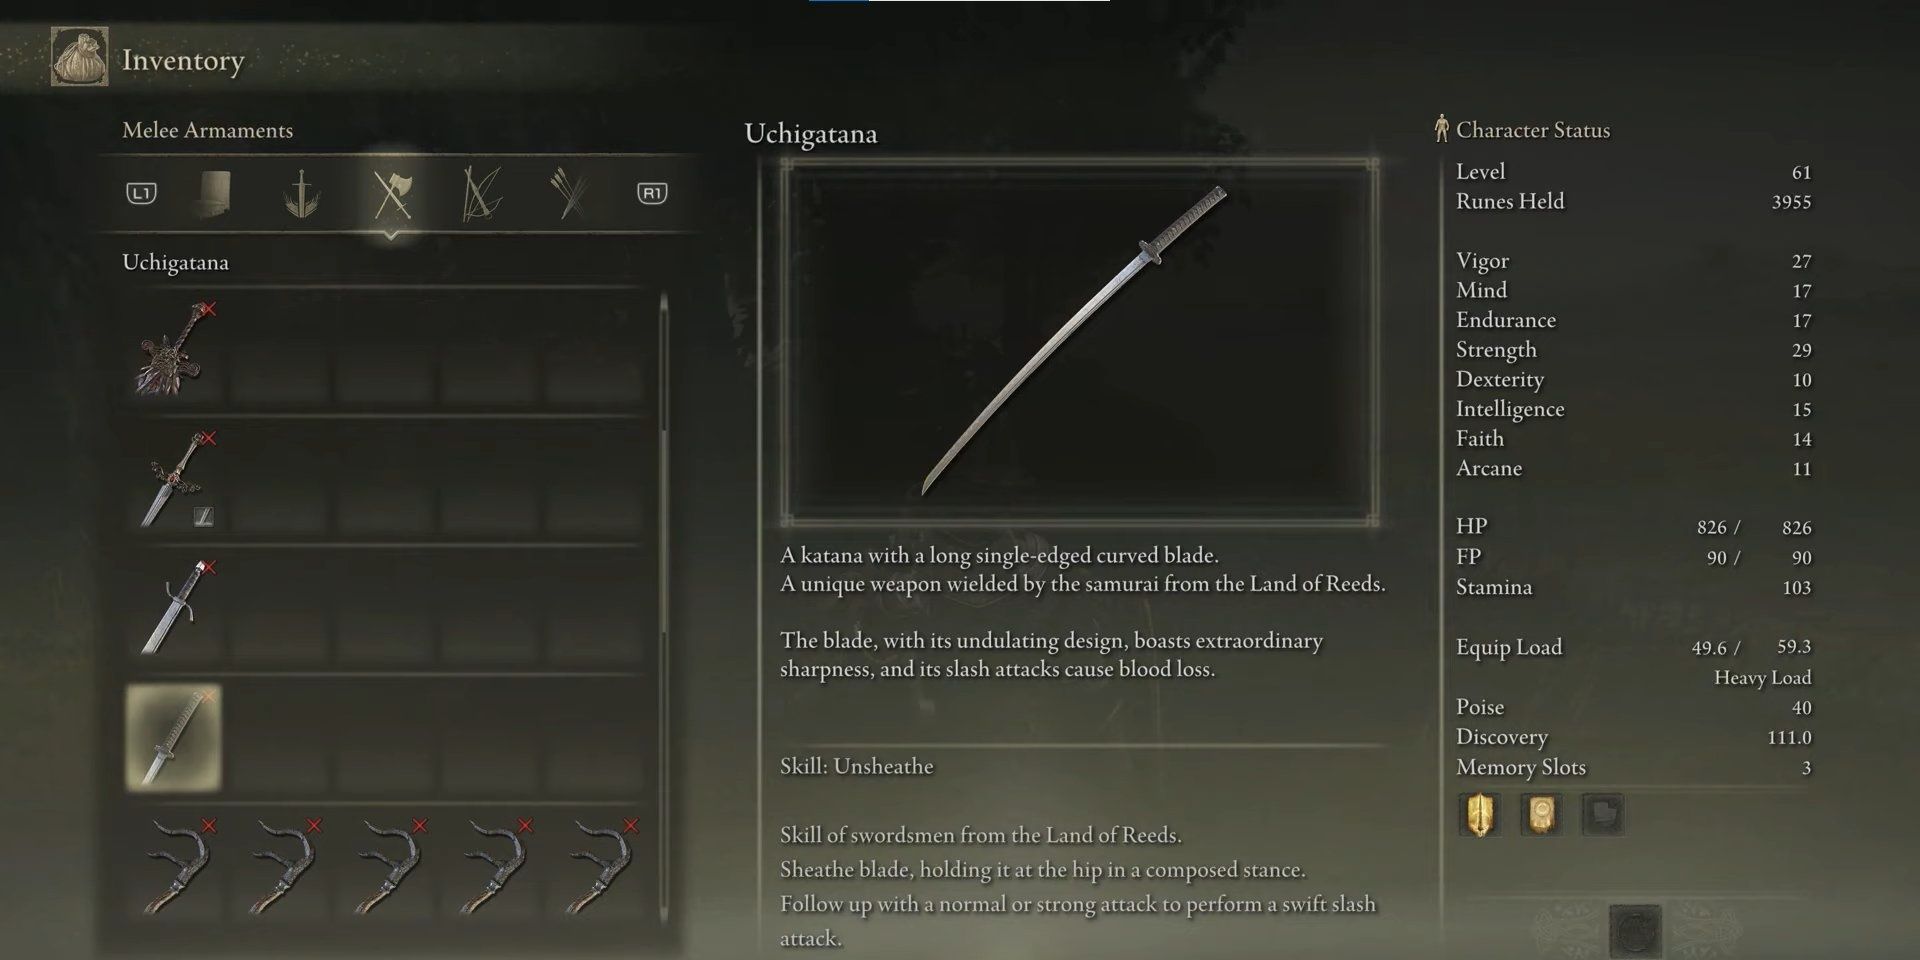 Inventory menu in Elden Ring showing the description and stats of the Uchigatana